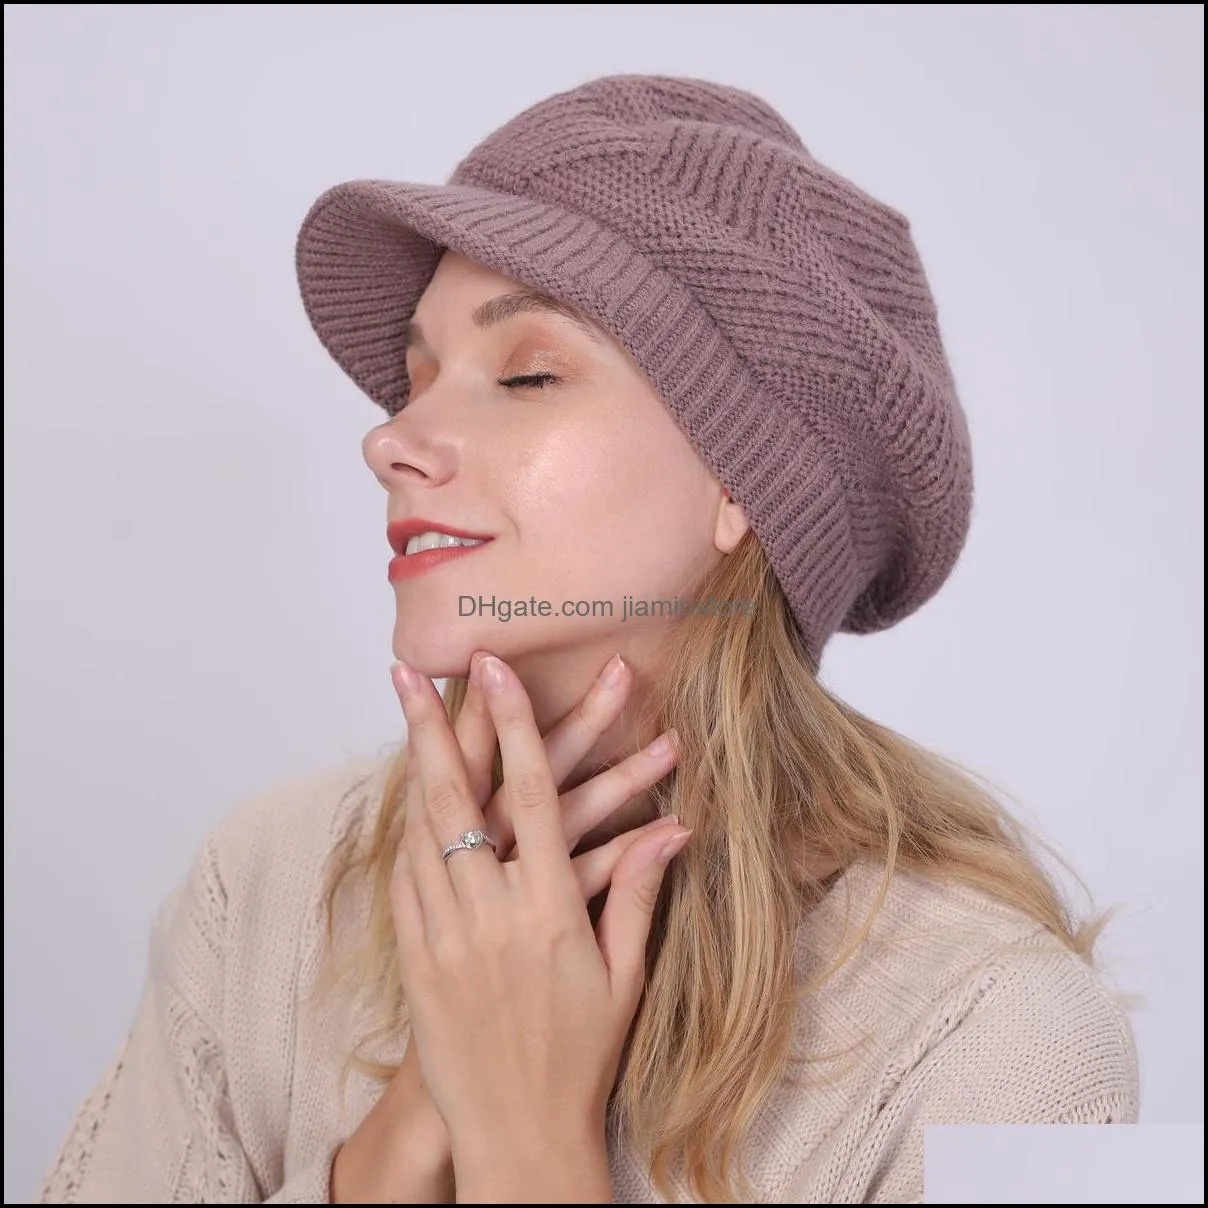 solid color fleece lined warm hat knit winter warm skull cap with brim for women fashion accessories gift